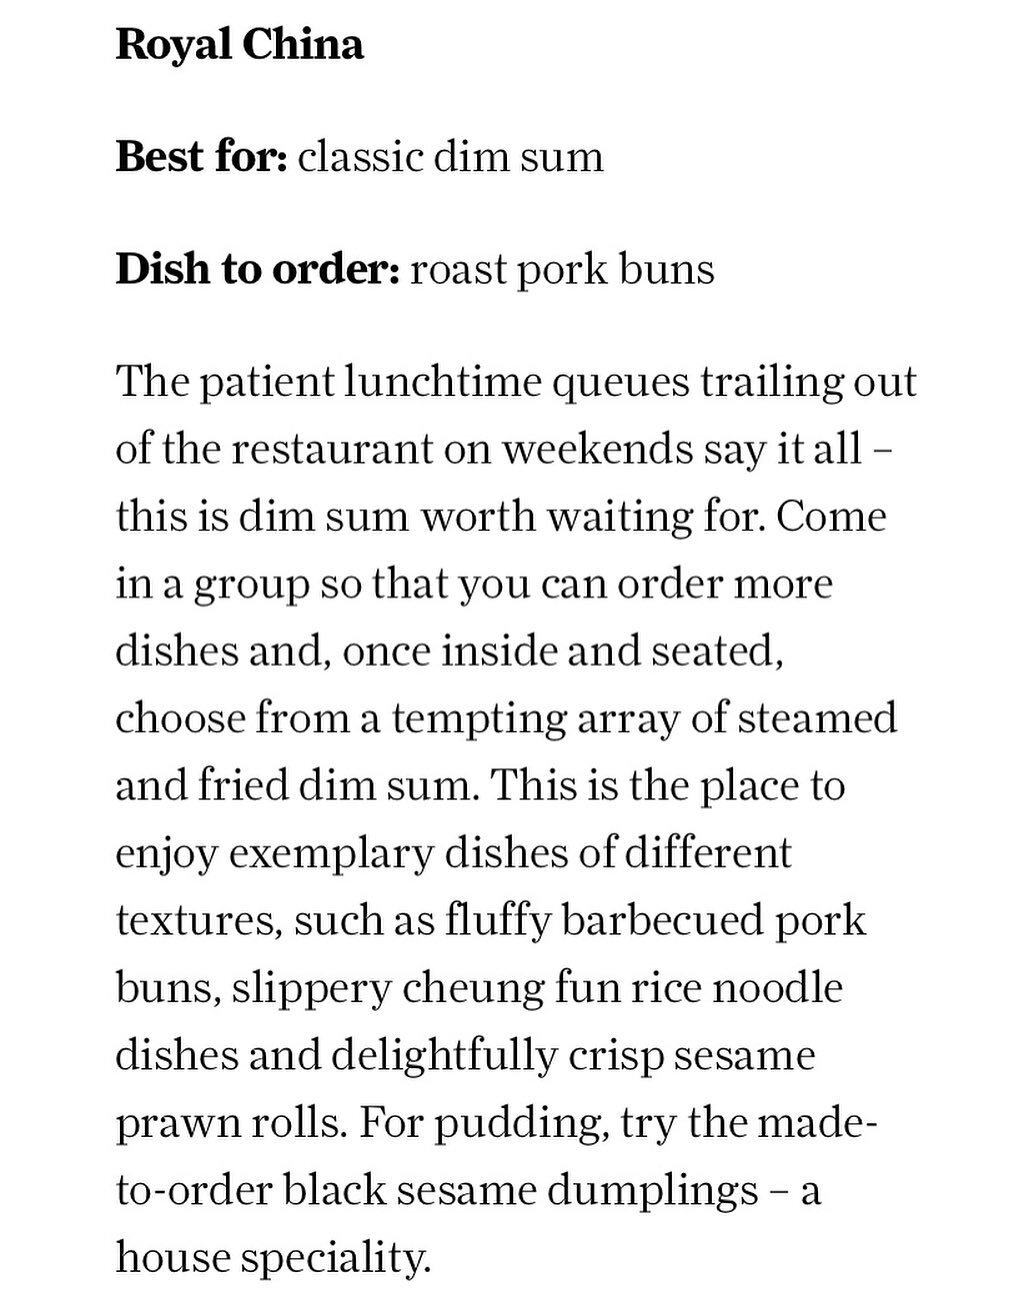 Best in town fair to say 😎

Thanks @condenasttraveller !

#dimsum #londonfood #chinesefood #royalchina